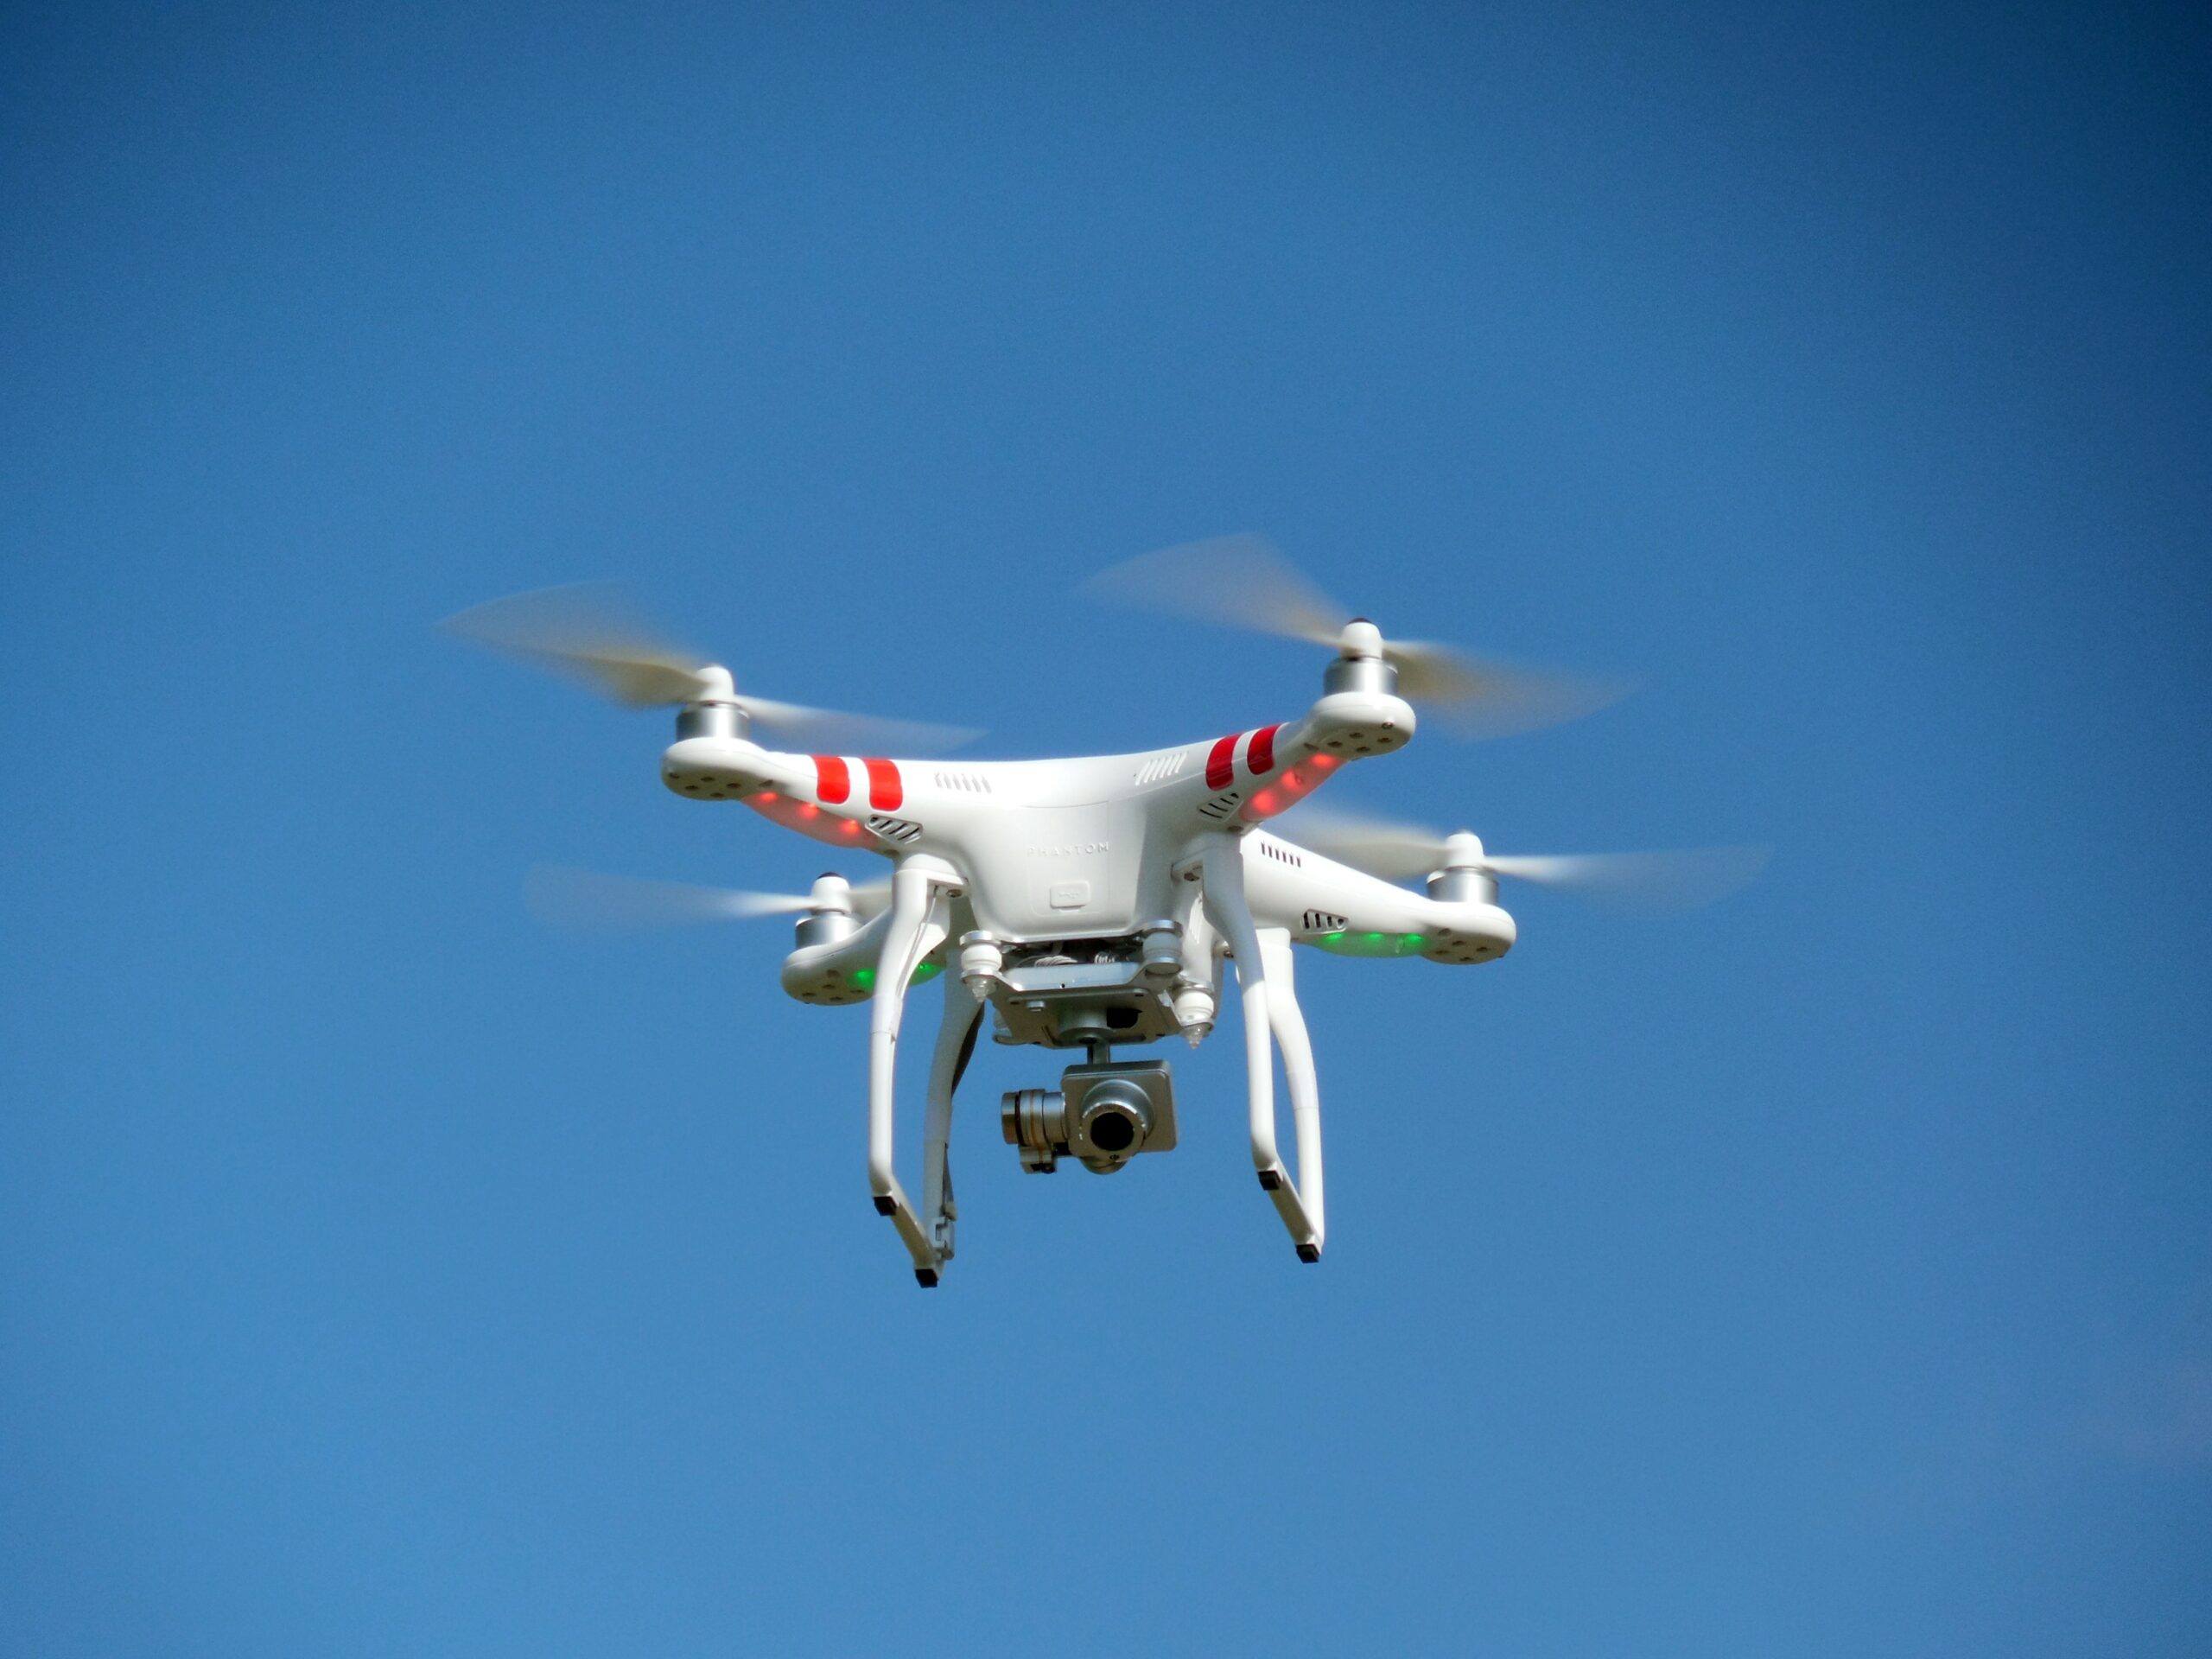 DOT’s Office of Inspector General Critical of FAA’s Drone Oversight